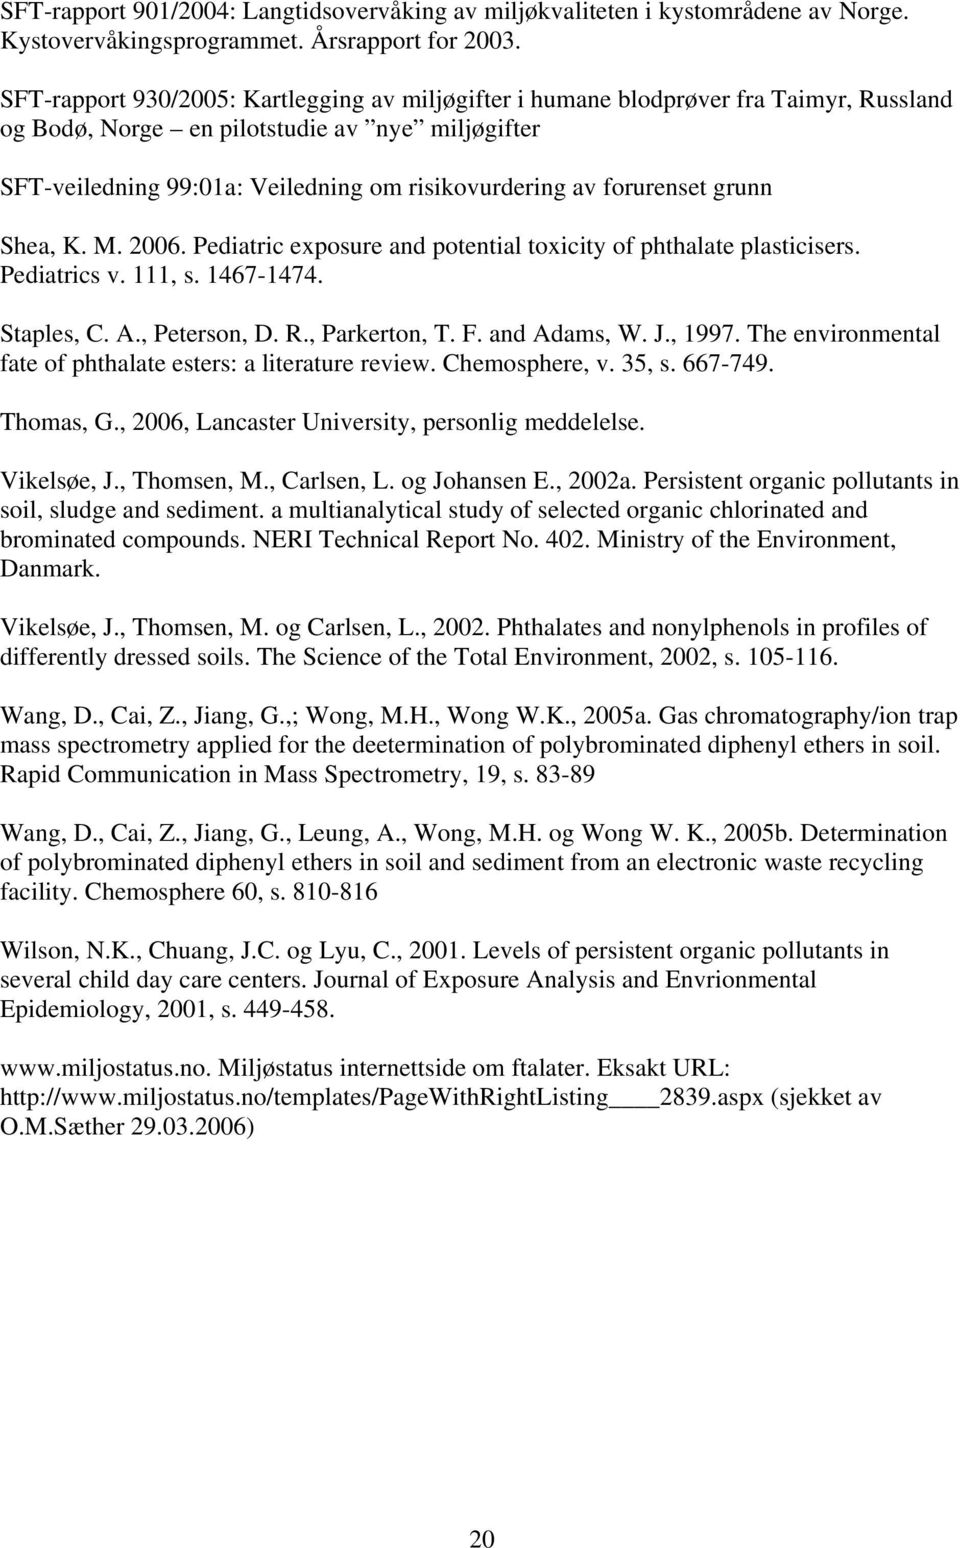 forurenset grunn Shea, K. M. 2006. Pediatric exposure and potential toxicity of phthalate plasticisers. Pediatrics v. 111, s. 1467-1474. Staples, C. A., Peterson, D. R., Parkerton, T. F. and Adams, W.